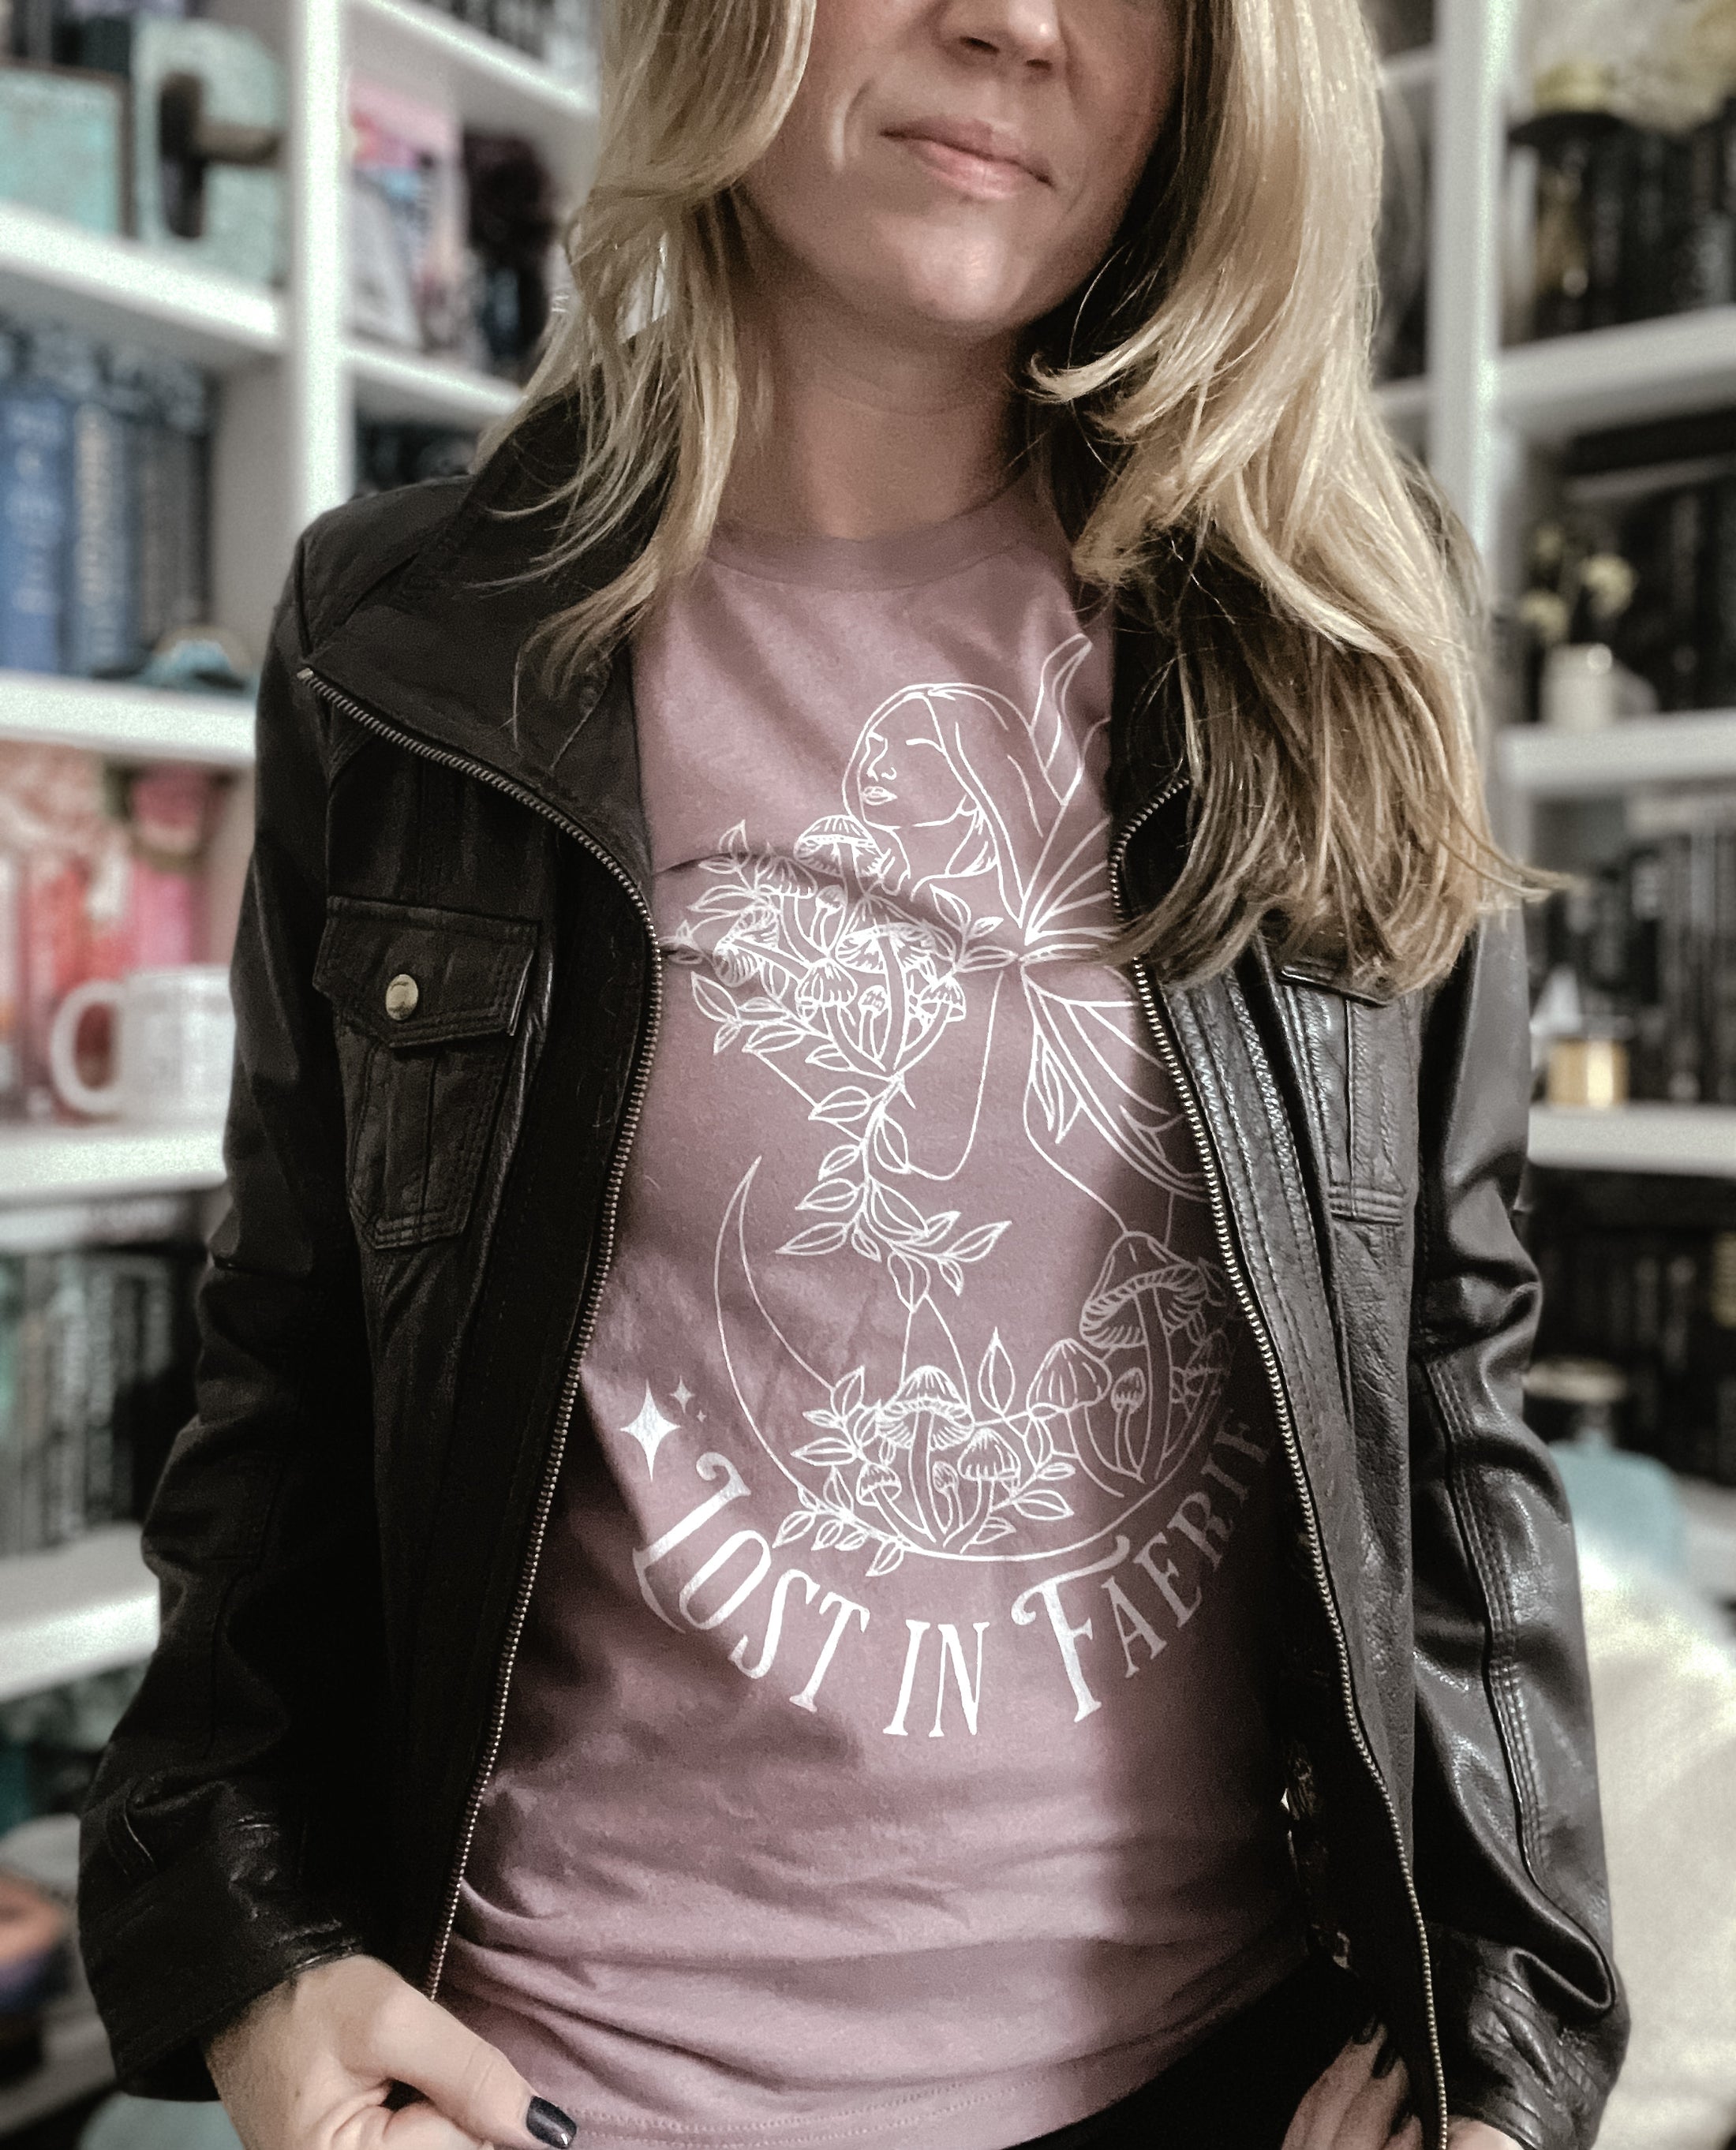 Lost in Faerie Unisex t-shirt - Dusty Rose with Light Design